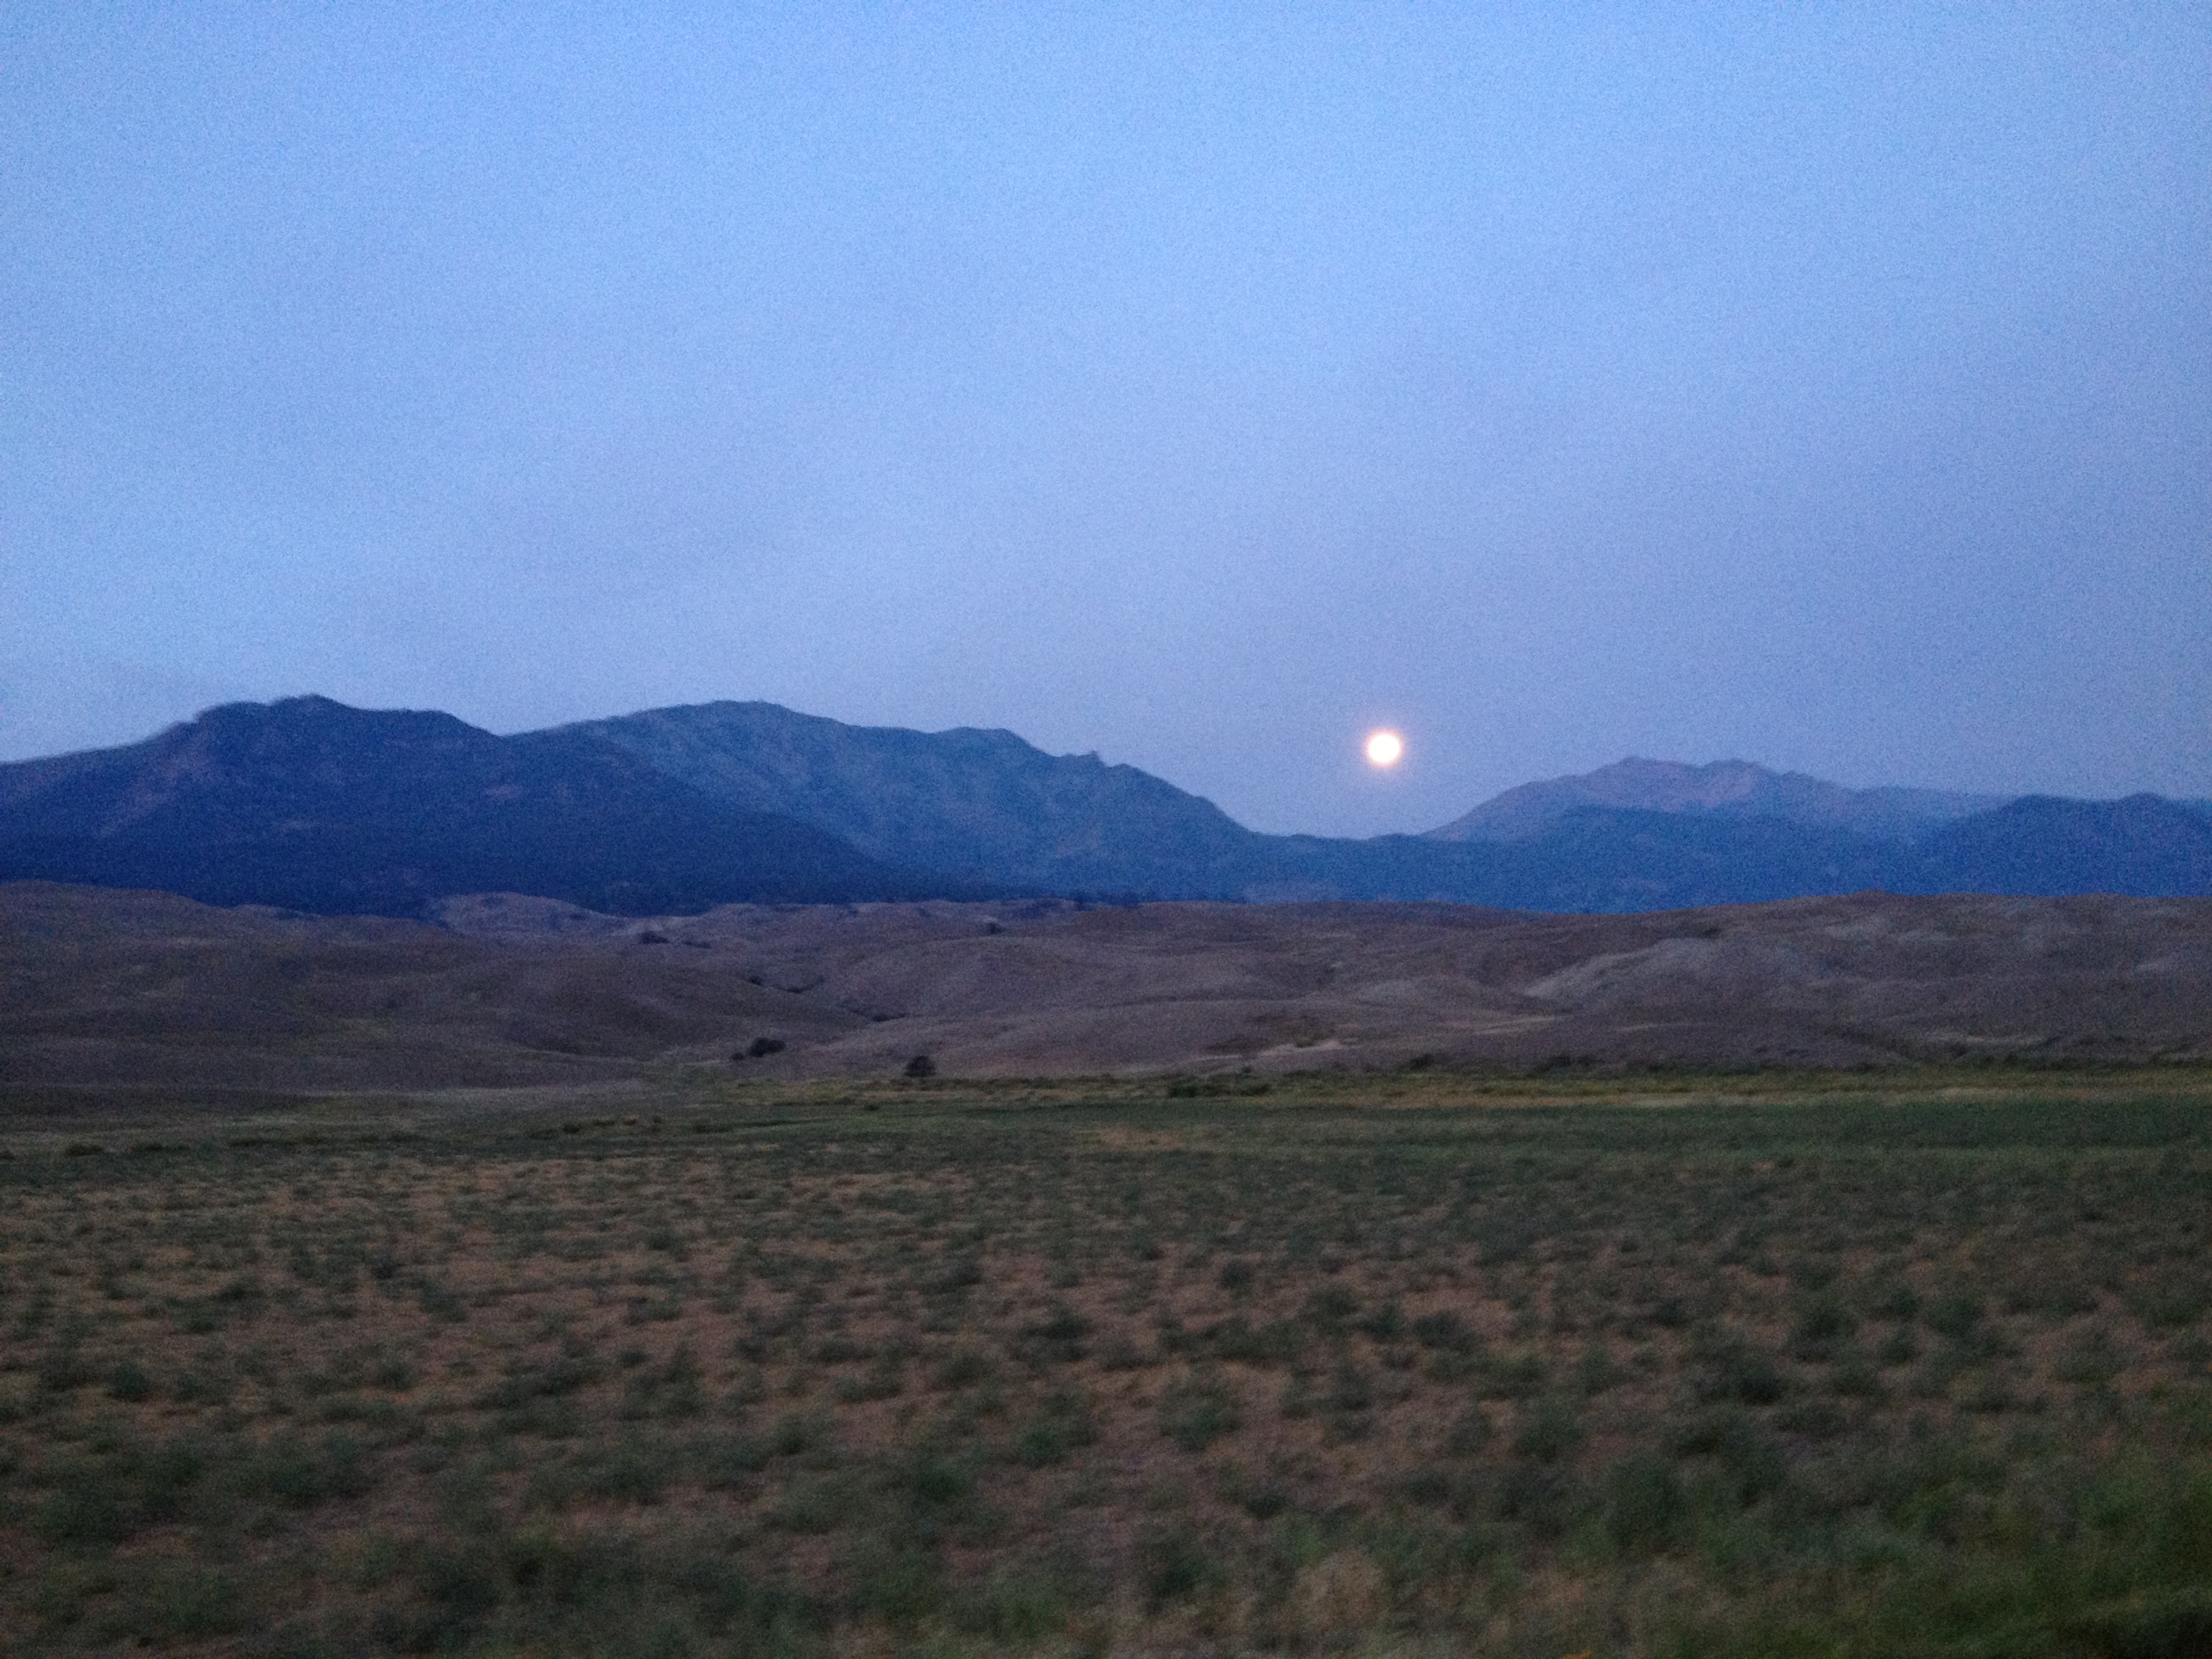 Moon setting in Park on the way to Gardner. Taken with an iPhone!